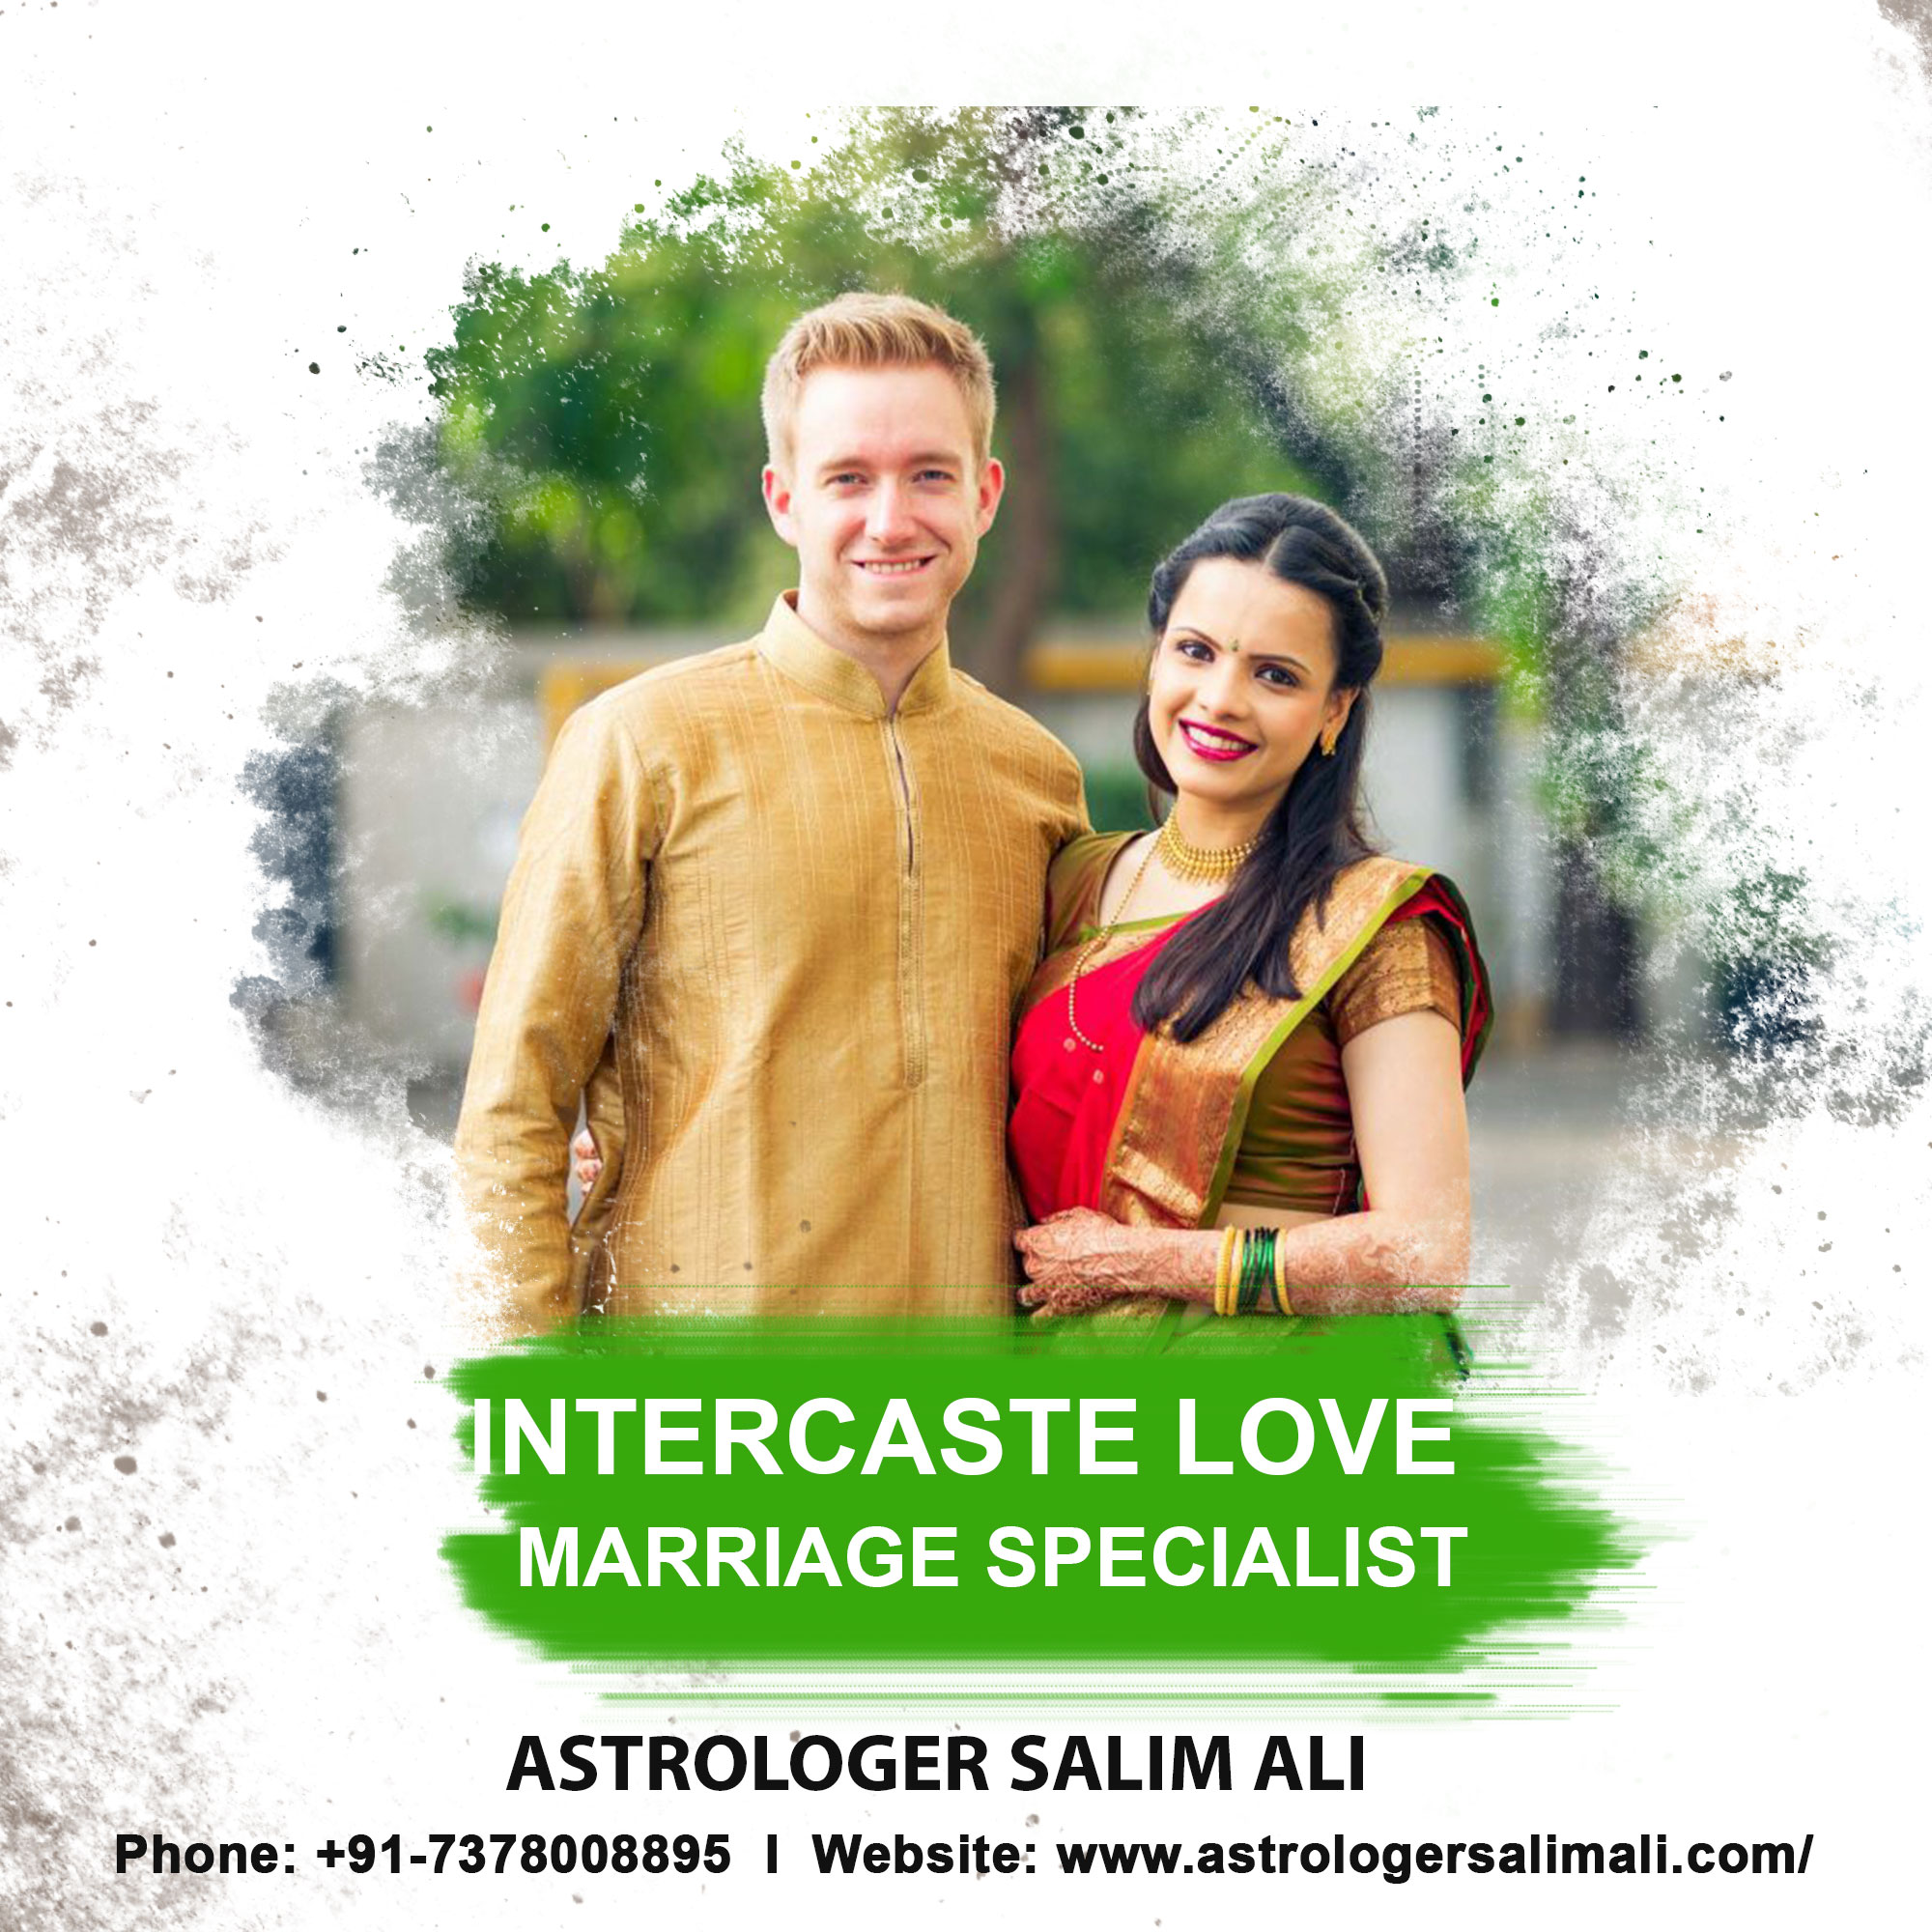 intercaste love marriage astrology